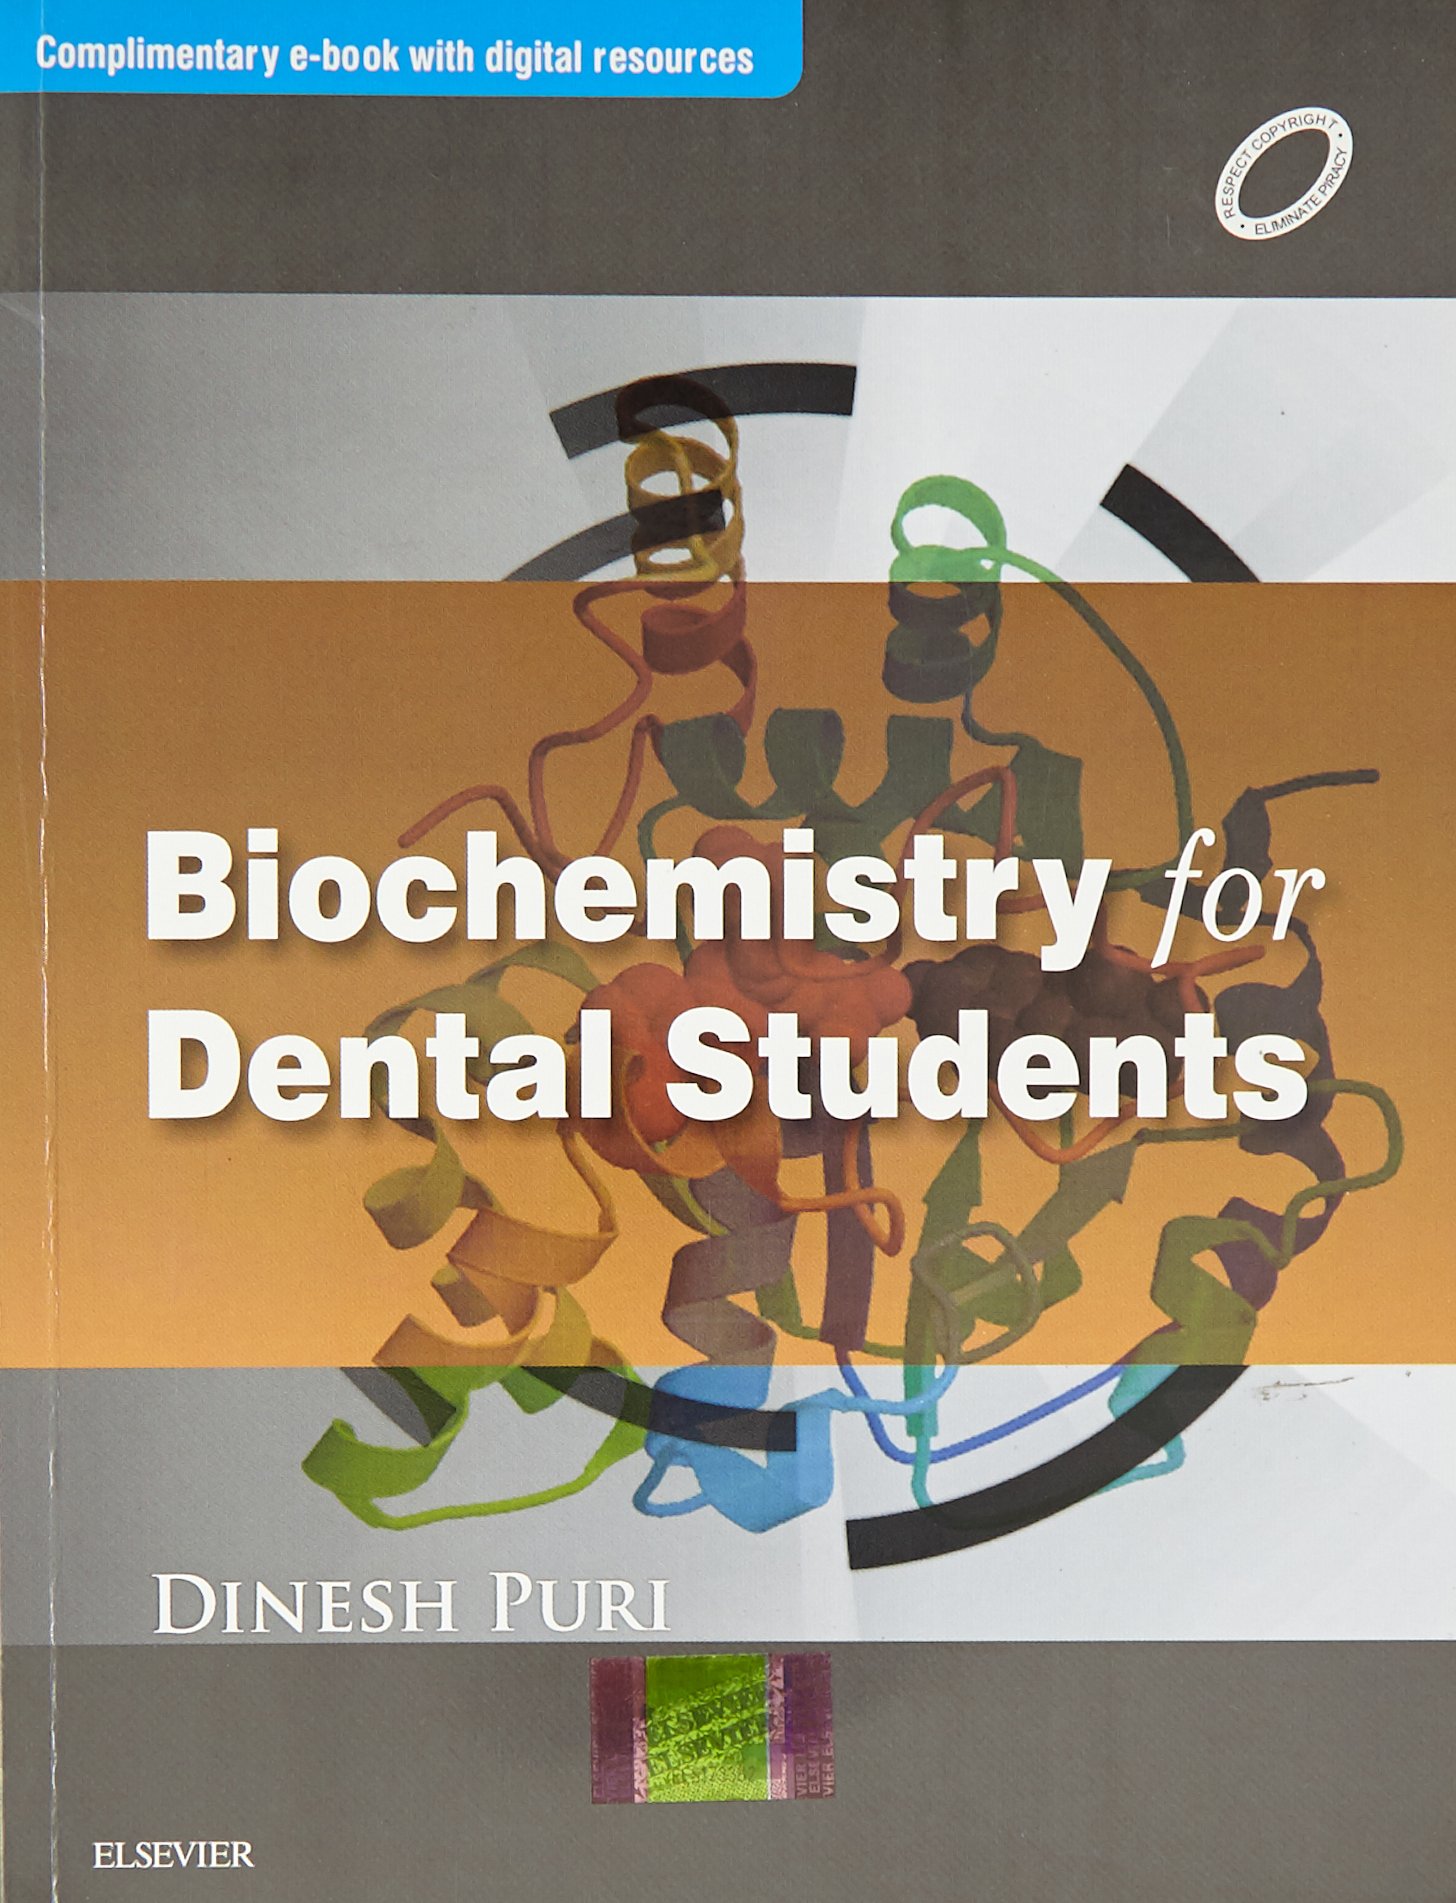 Biochemistry for Dental Students (Complimentary e-book with digital resources), 1e